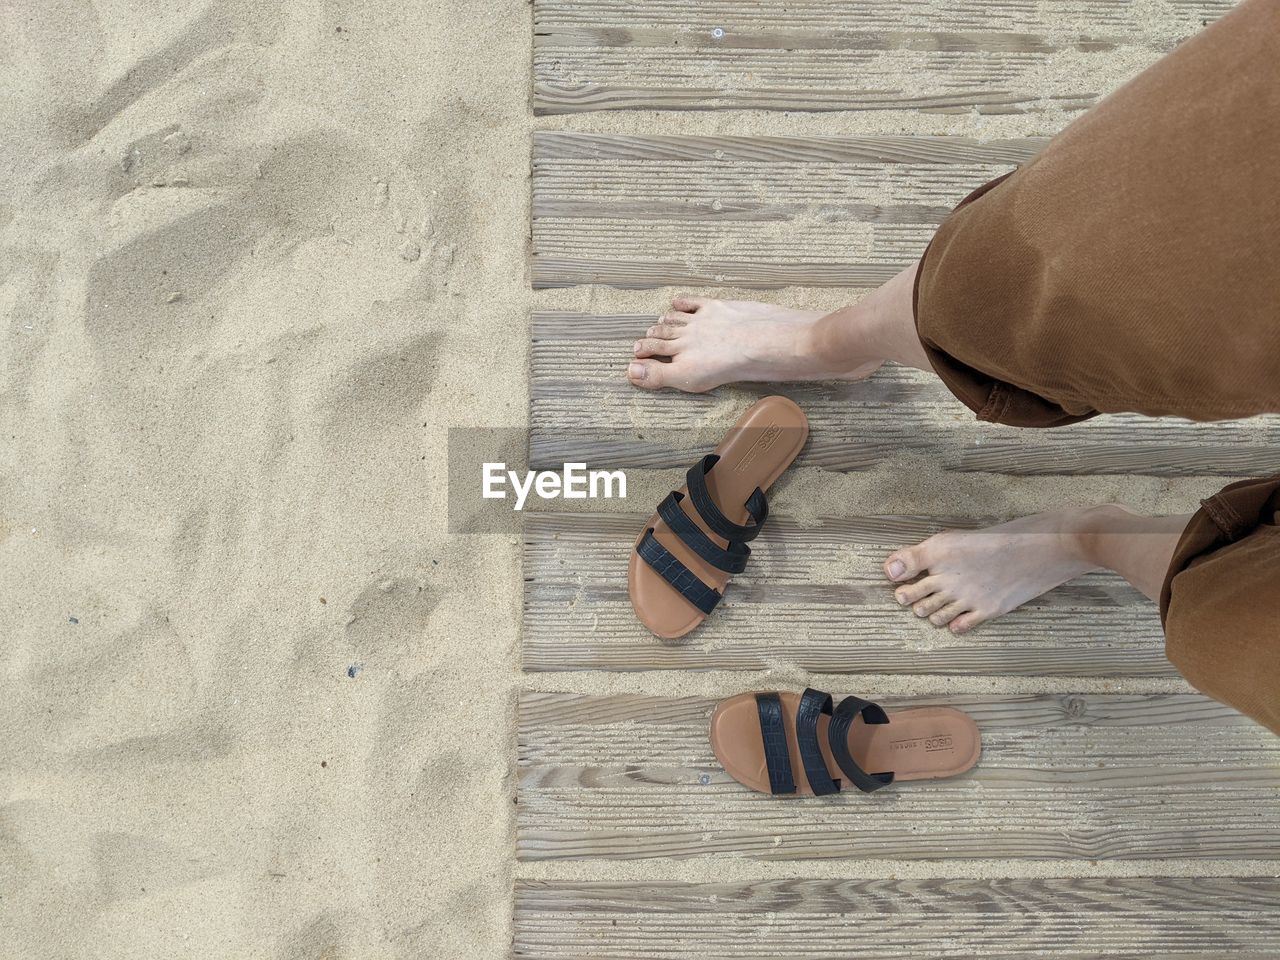 Personal perspective of looking down at bare feet with sandals on sand.